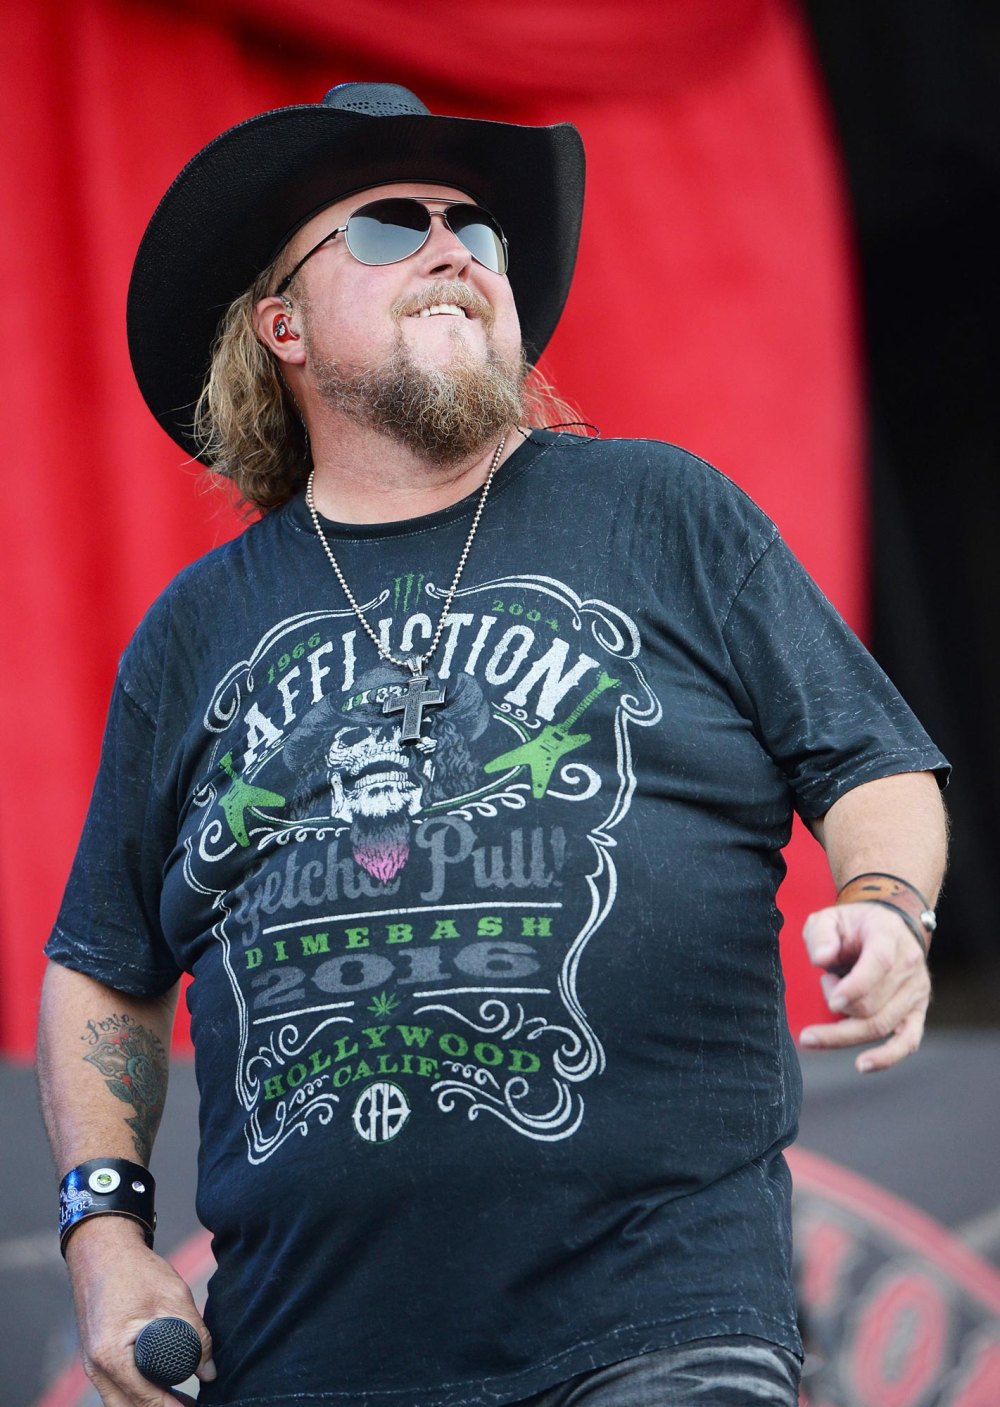 Colt Ford Suffers Heart Attack After Arizona Concert In Stable but Critical Condition